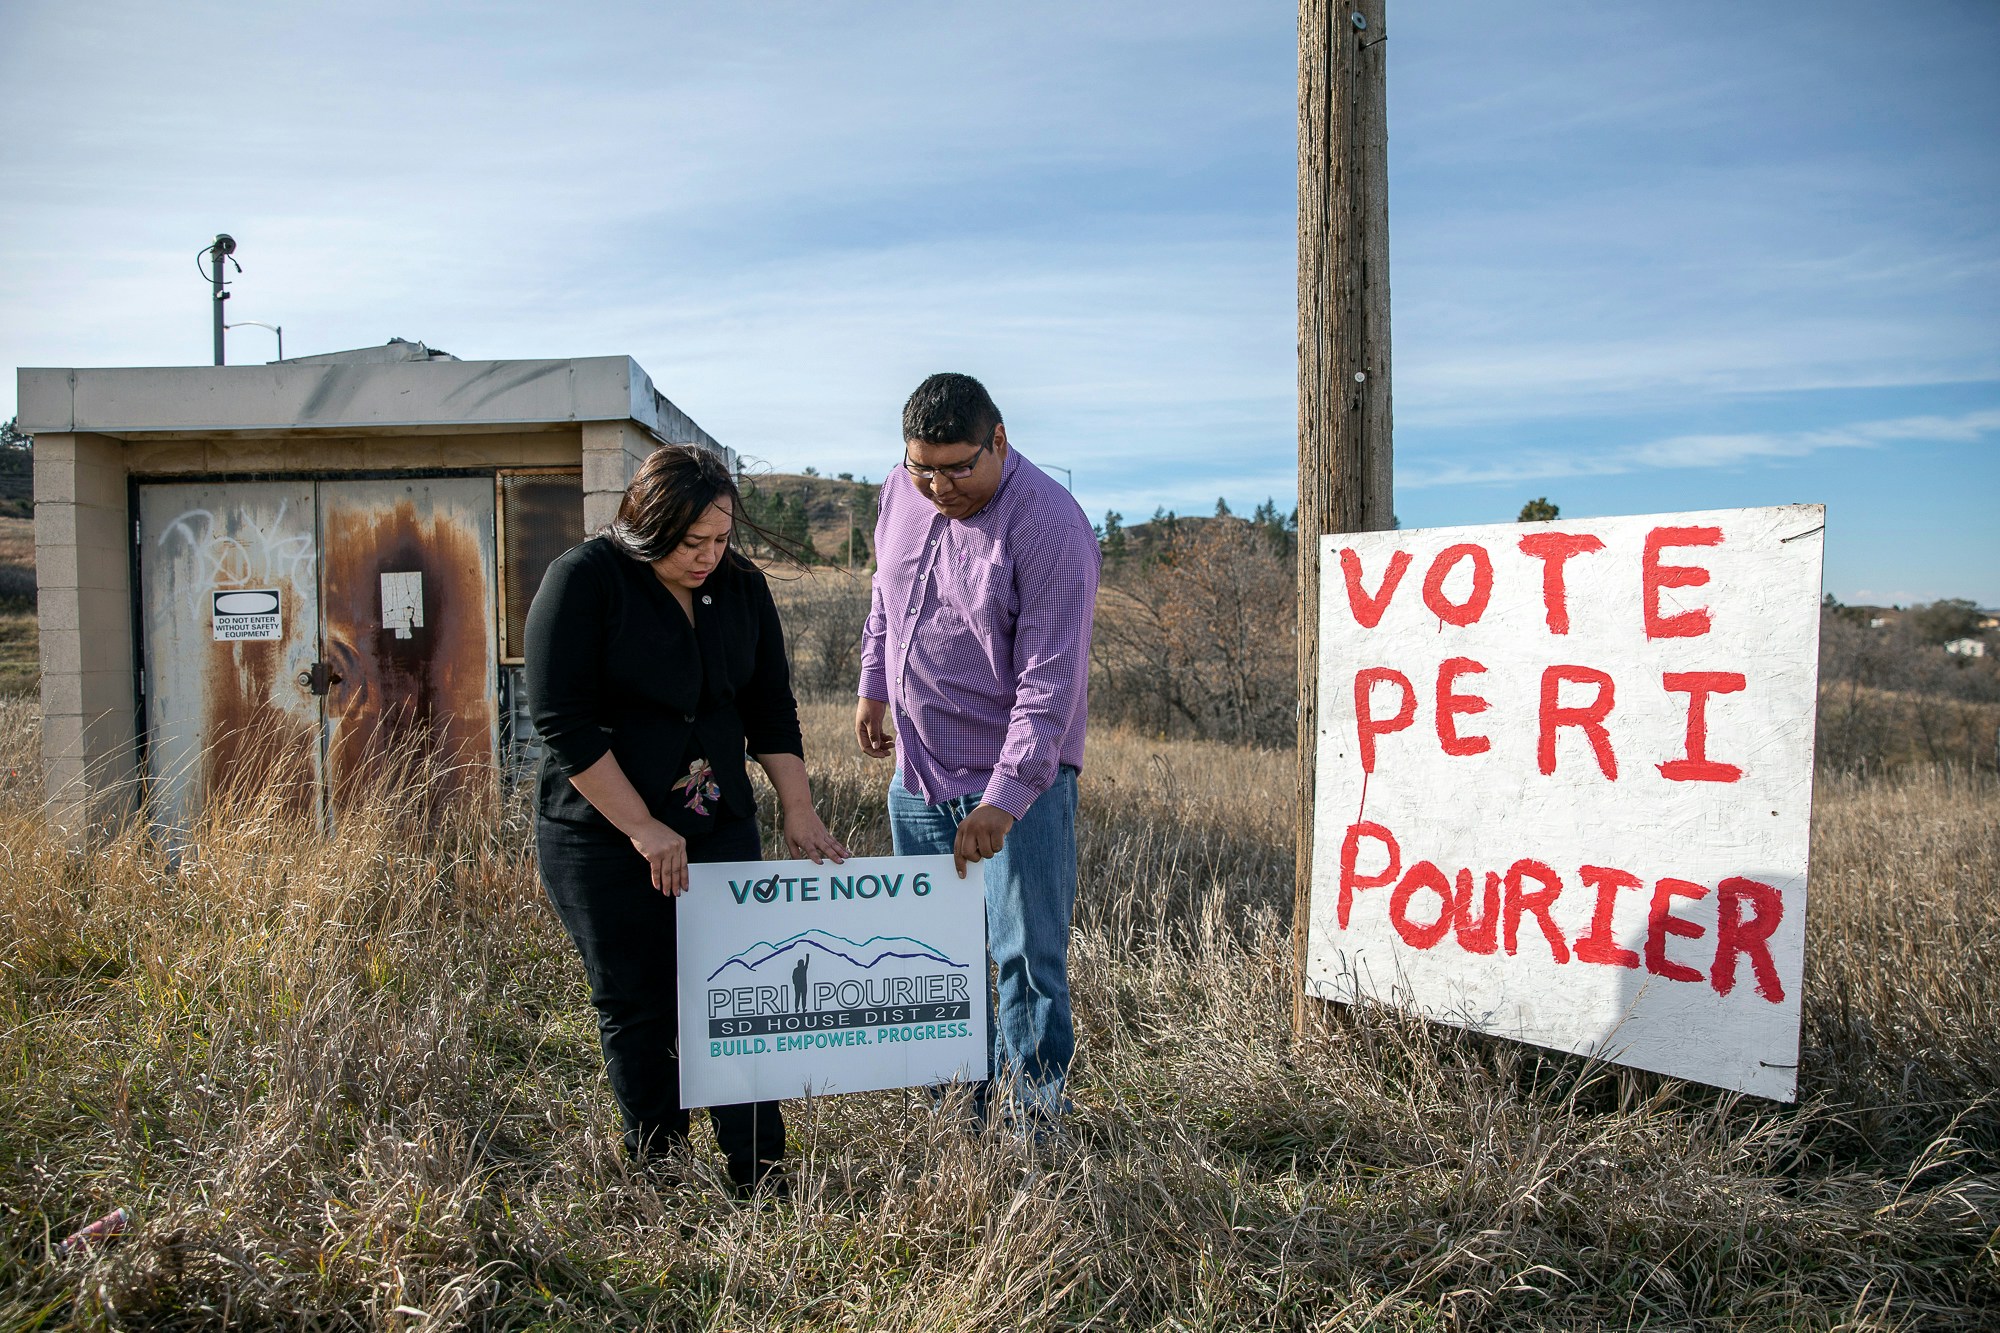 In this Wednesday, Oct. 24, 2018 photo, Peri Pourier, a candidate for the South Dakota Legislature, and her partner, Ernest Weston, stand for a portrait in Porcupine, S.D., on the Pine Ridge Indian Reservation. As with state and municipal races across the country, elections for tribal candidates on the Pine Ridge reservation are in full swing for the Nov. 6 election. (Ryan Hermens/Rapid City Journal via AP)